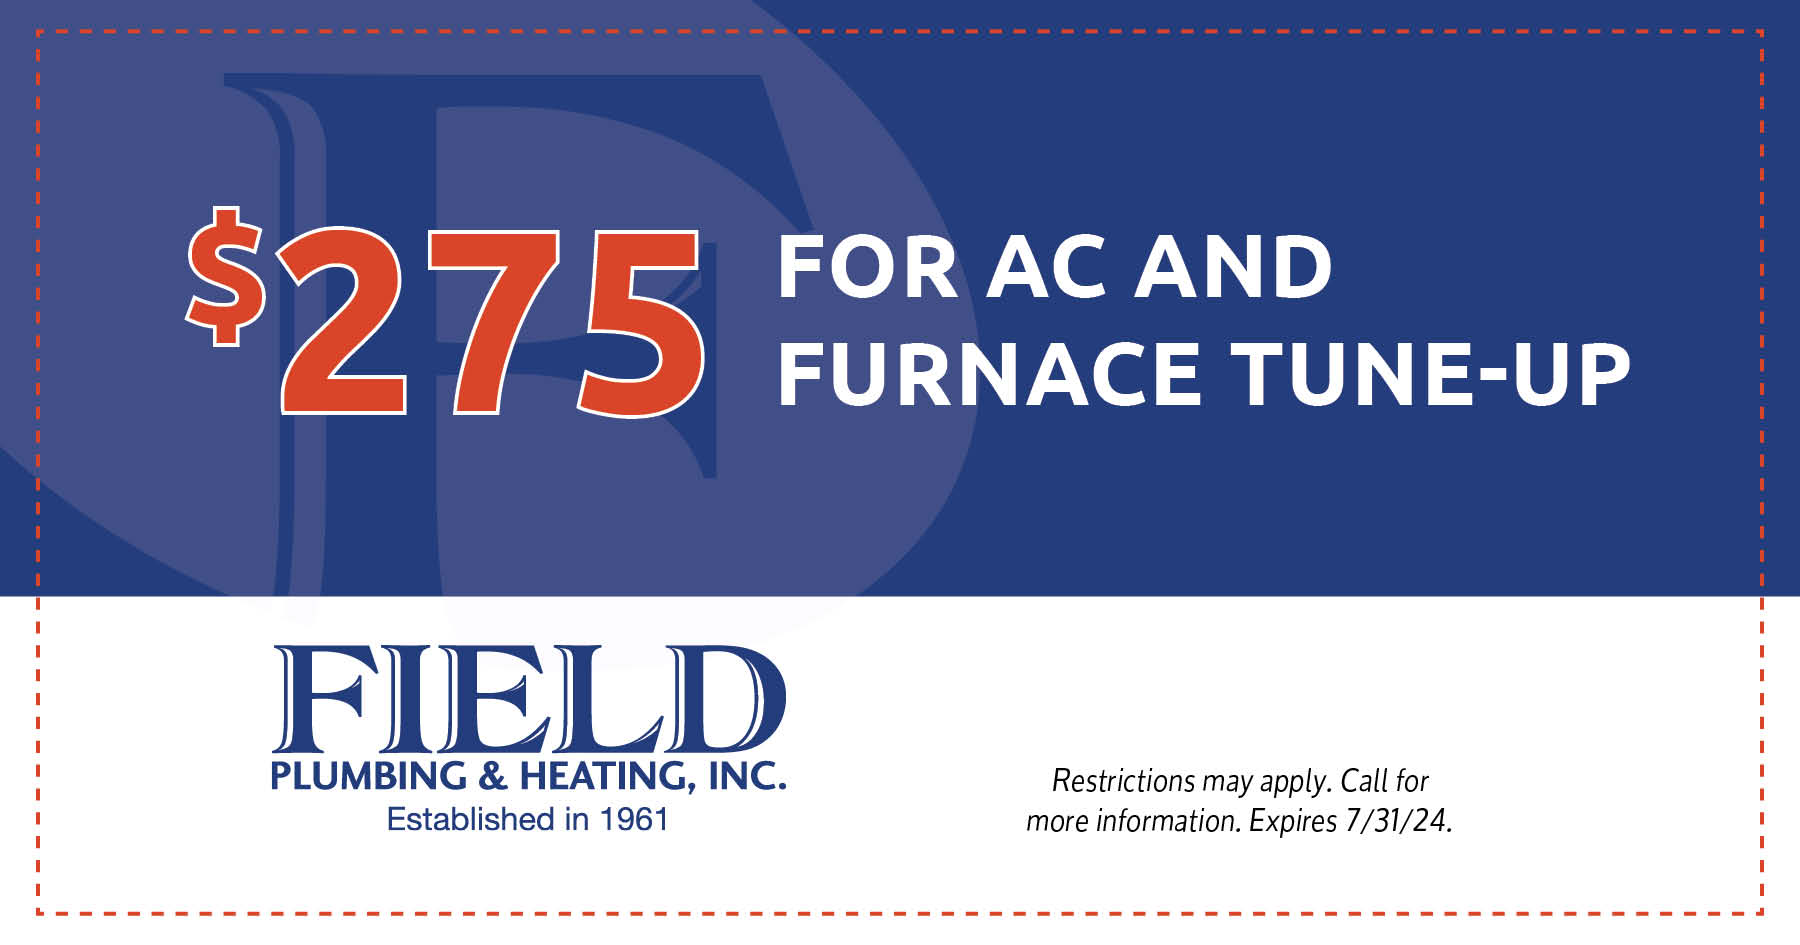 $275 for AC and Furnace tune-up coupon.